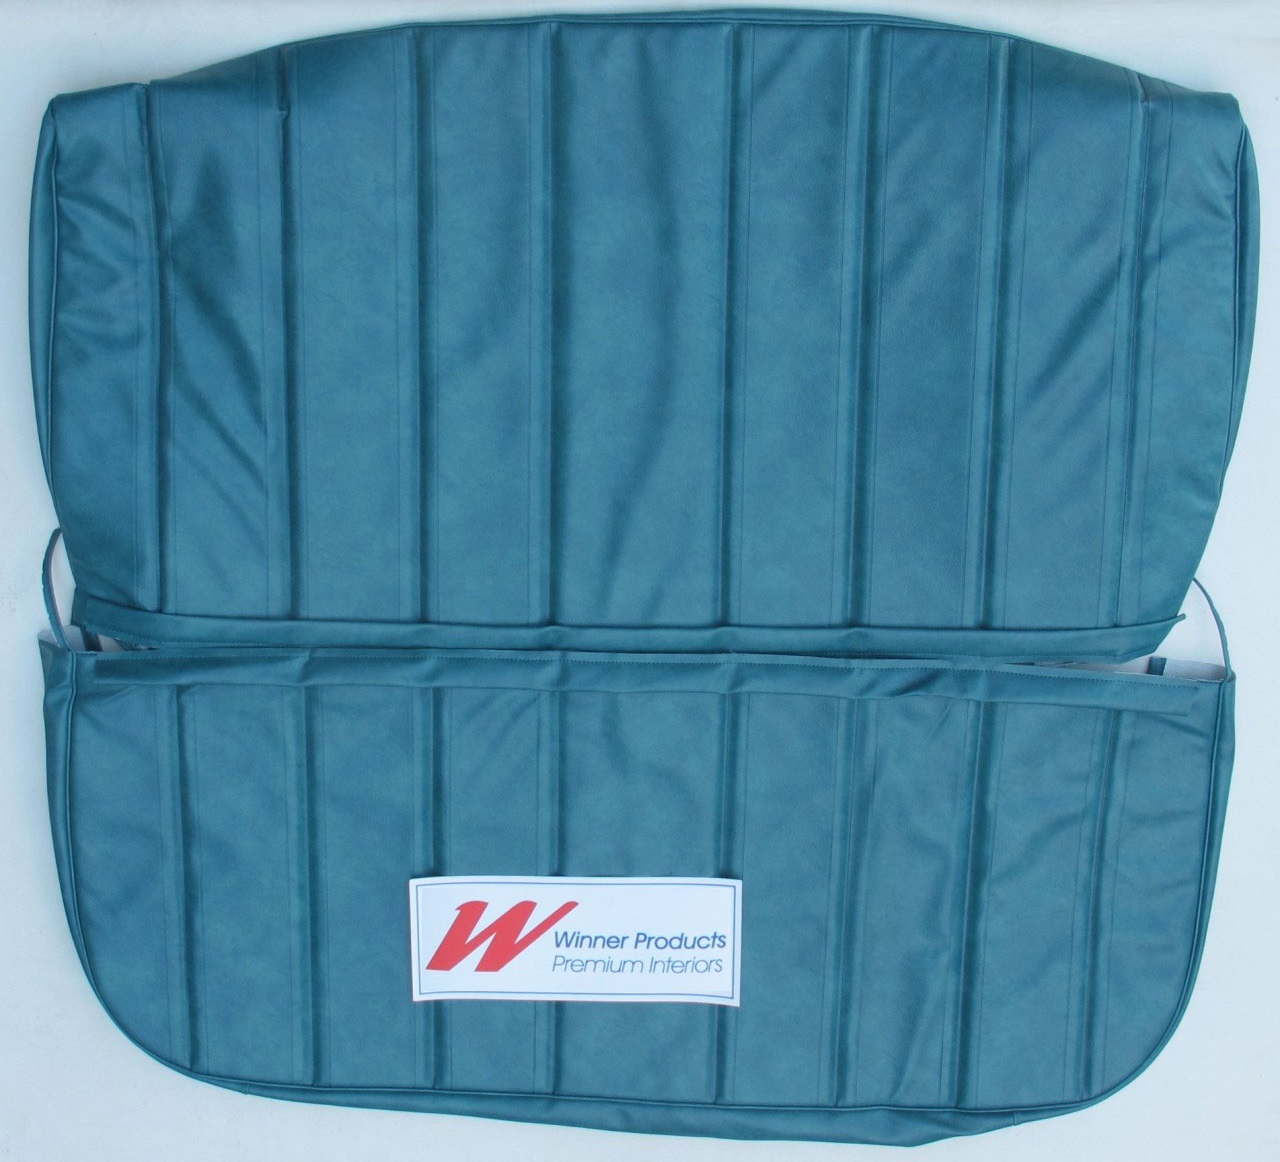 Holden Kingswood HG Kingswood Panel Van 13E Turquoise Mist Seat Covers (Image 1 of 1)